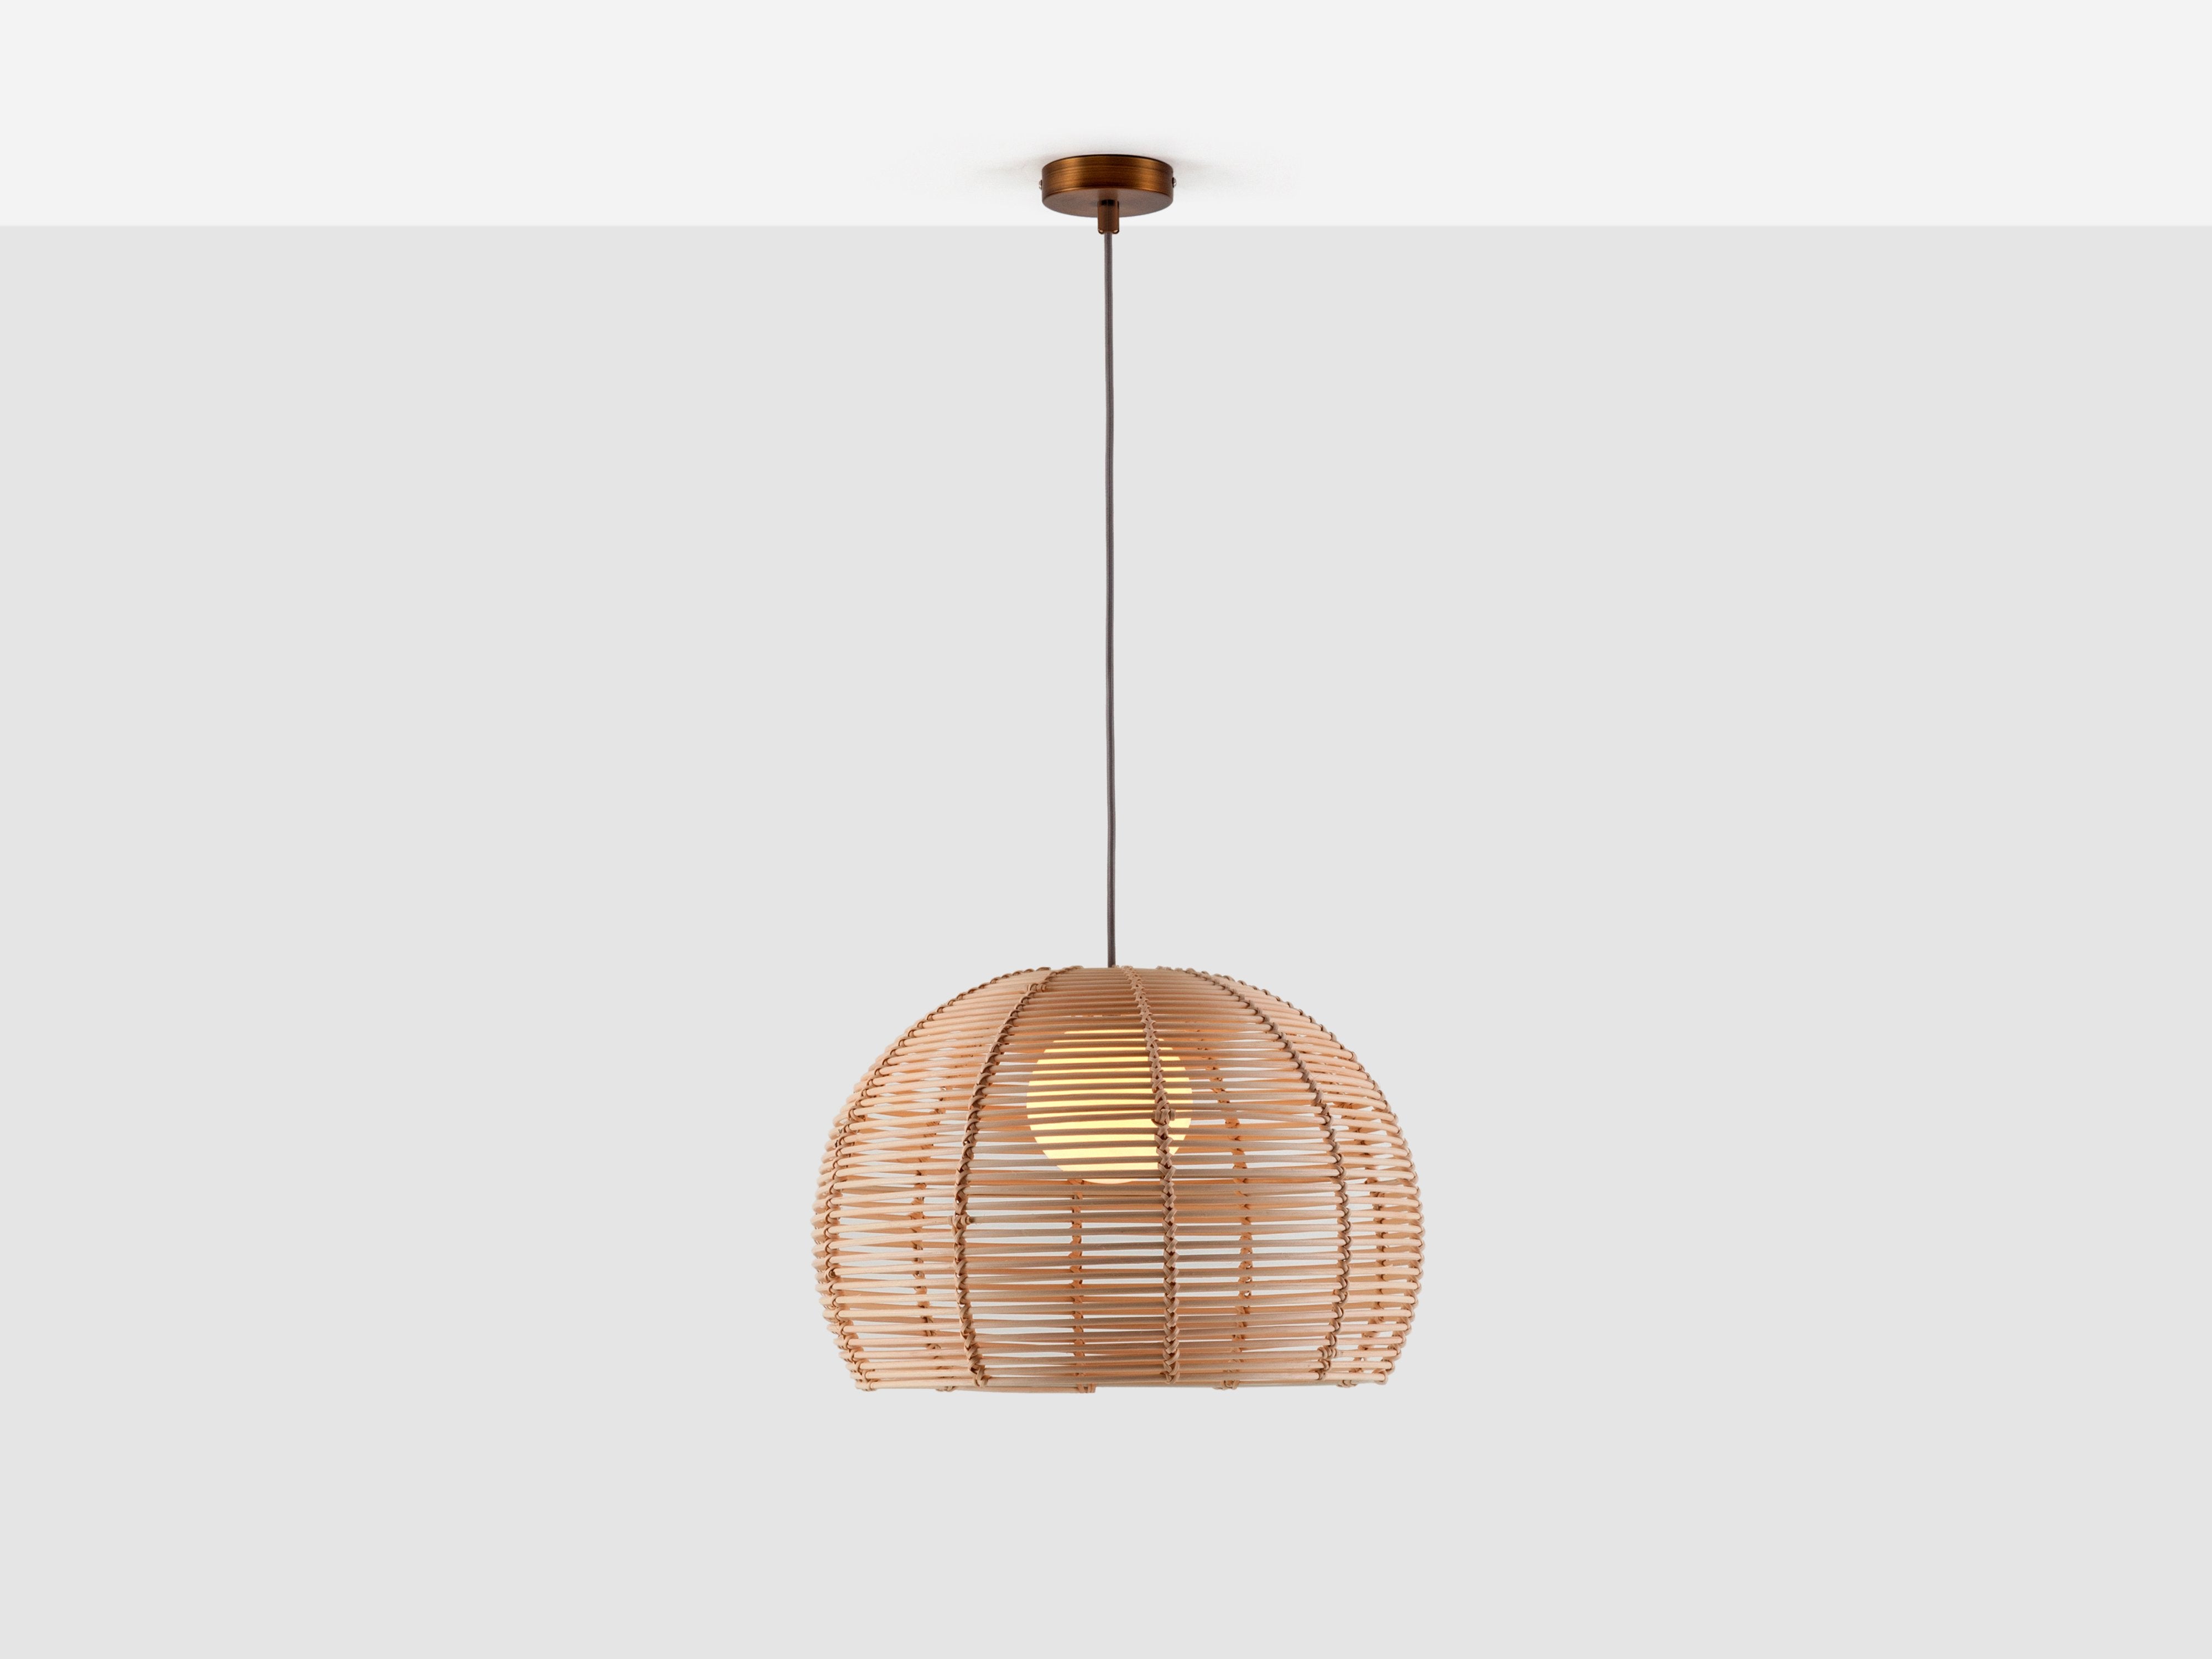 Discover a Rustic Milan Wooden Lampshade and Ceiling Light by Natural Gift Store on notonthehighstreet.com - Perfect for Unforgettable Gift-Giving at Just $159!